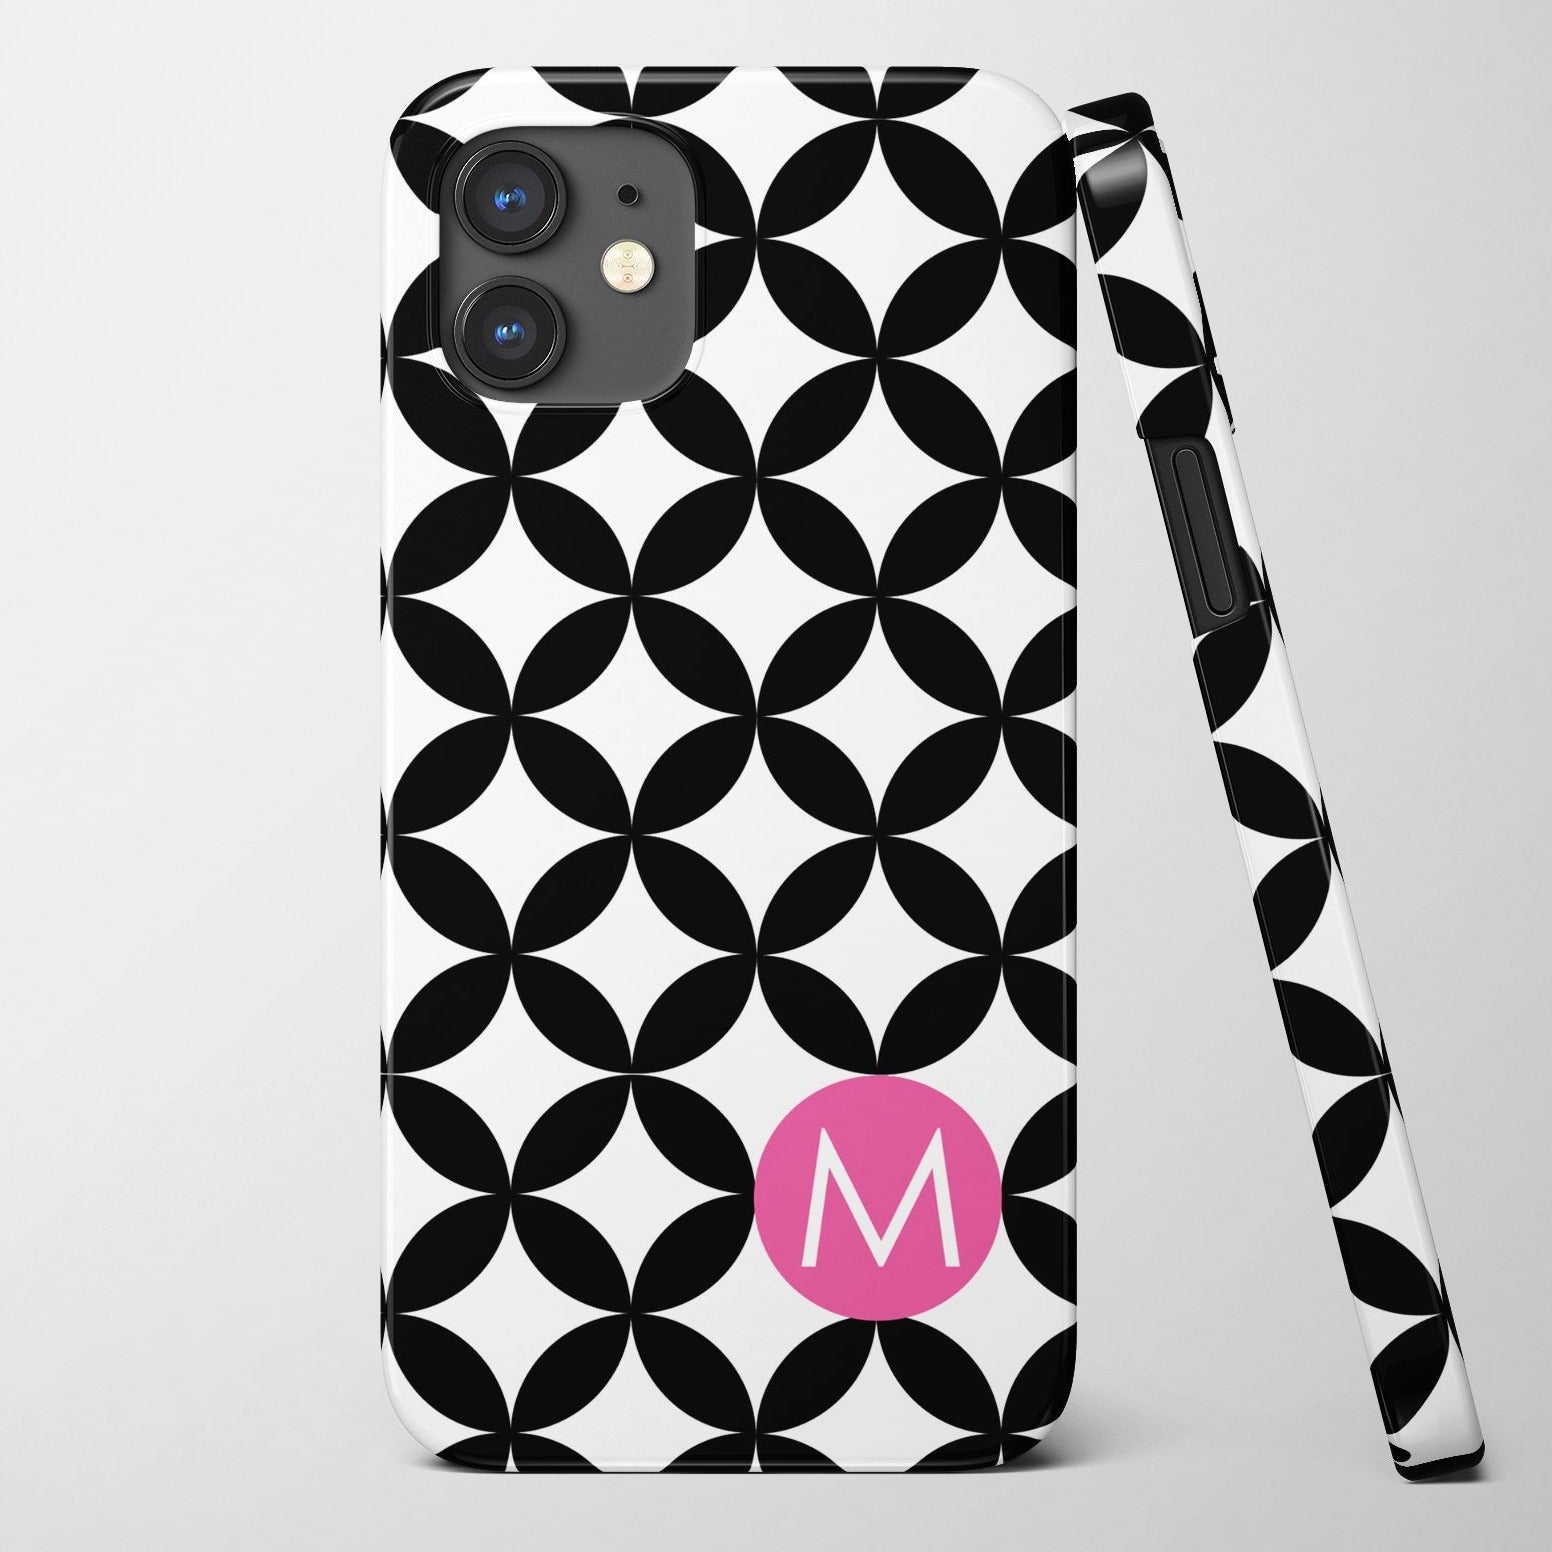 Modern Dots iPhone Custom case, personalized with your initial, available for the iphone 15 and prior models, choose any color scheme